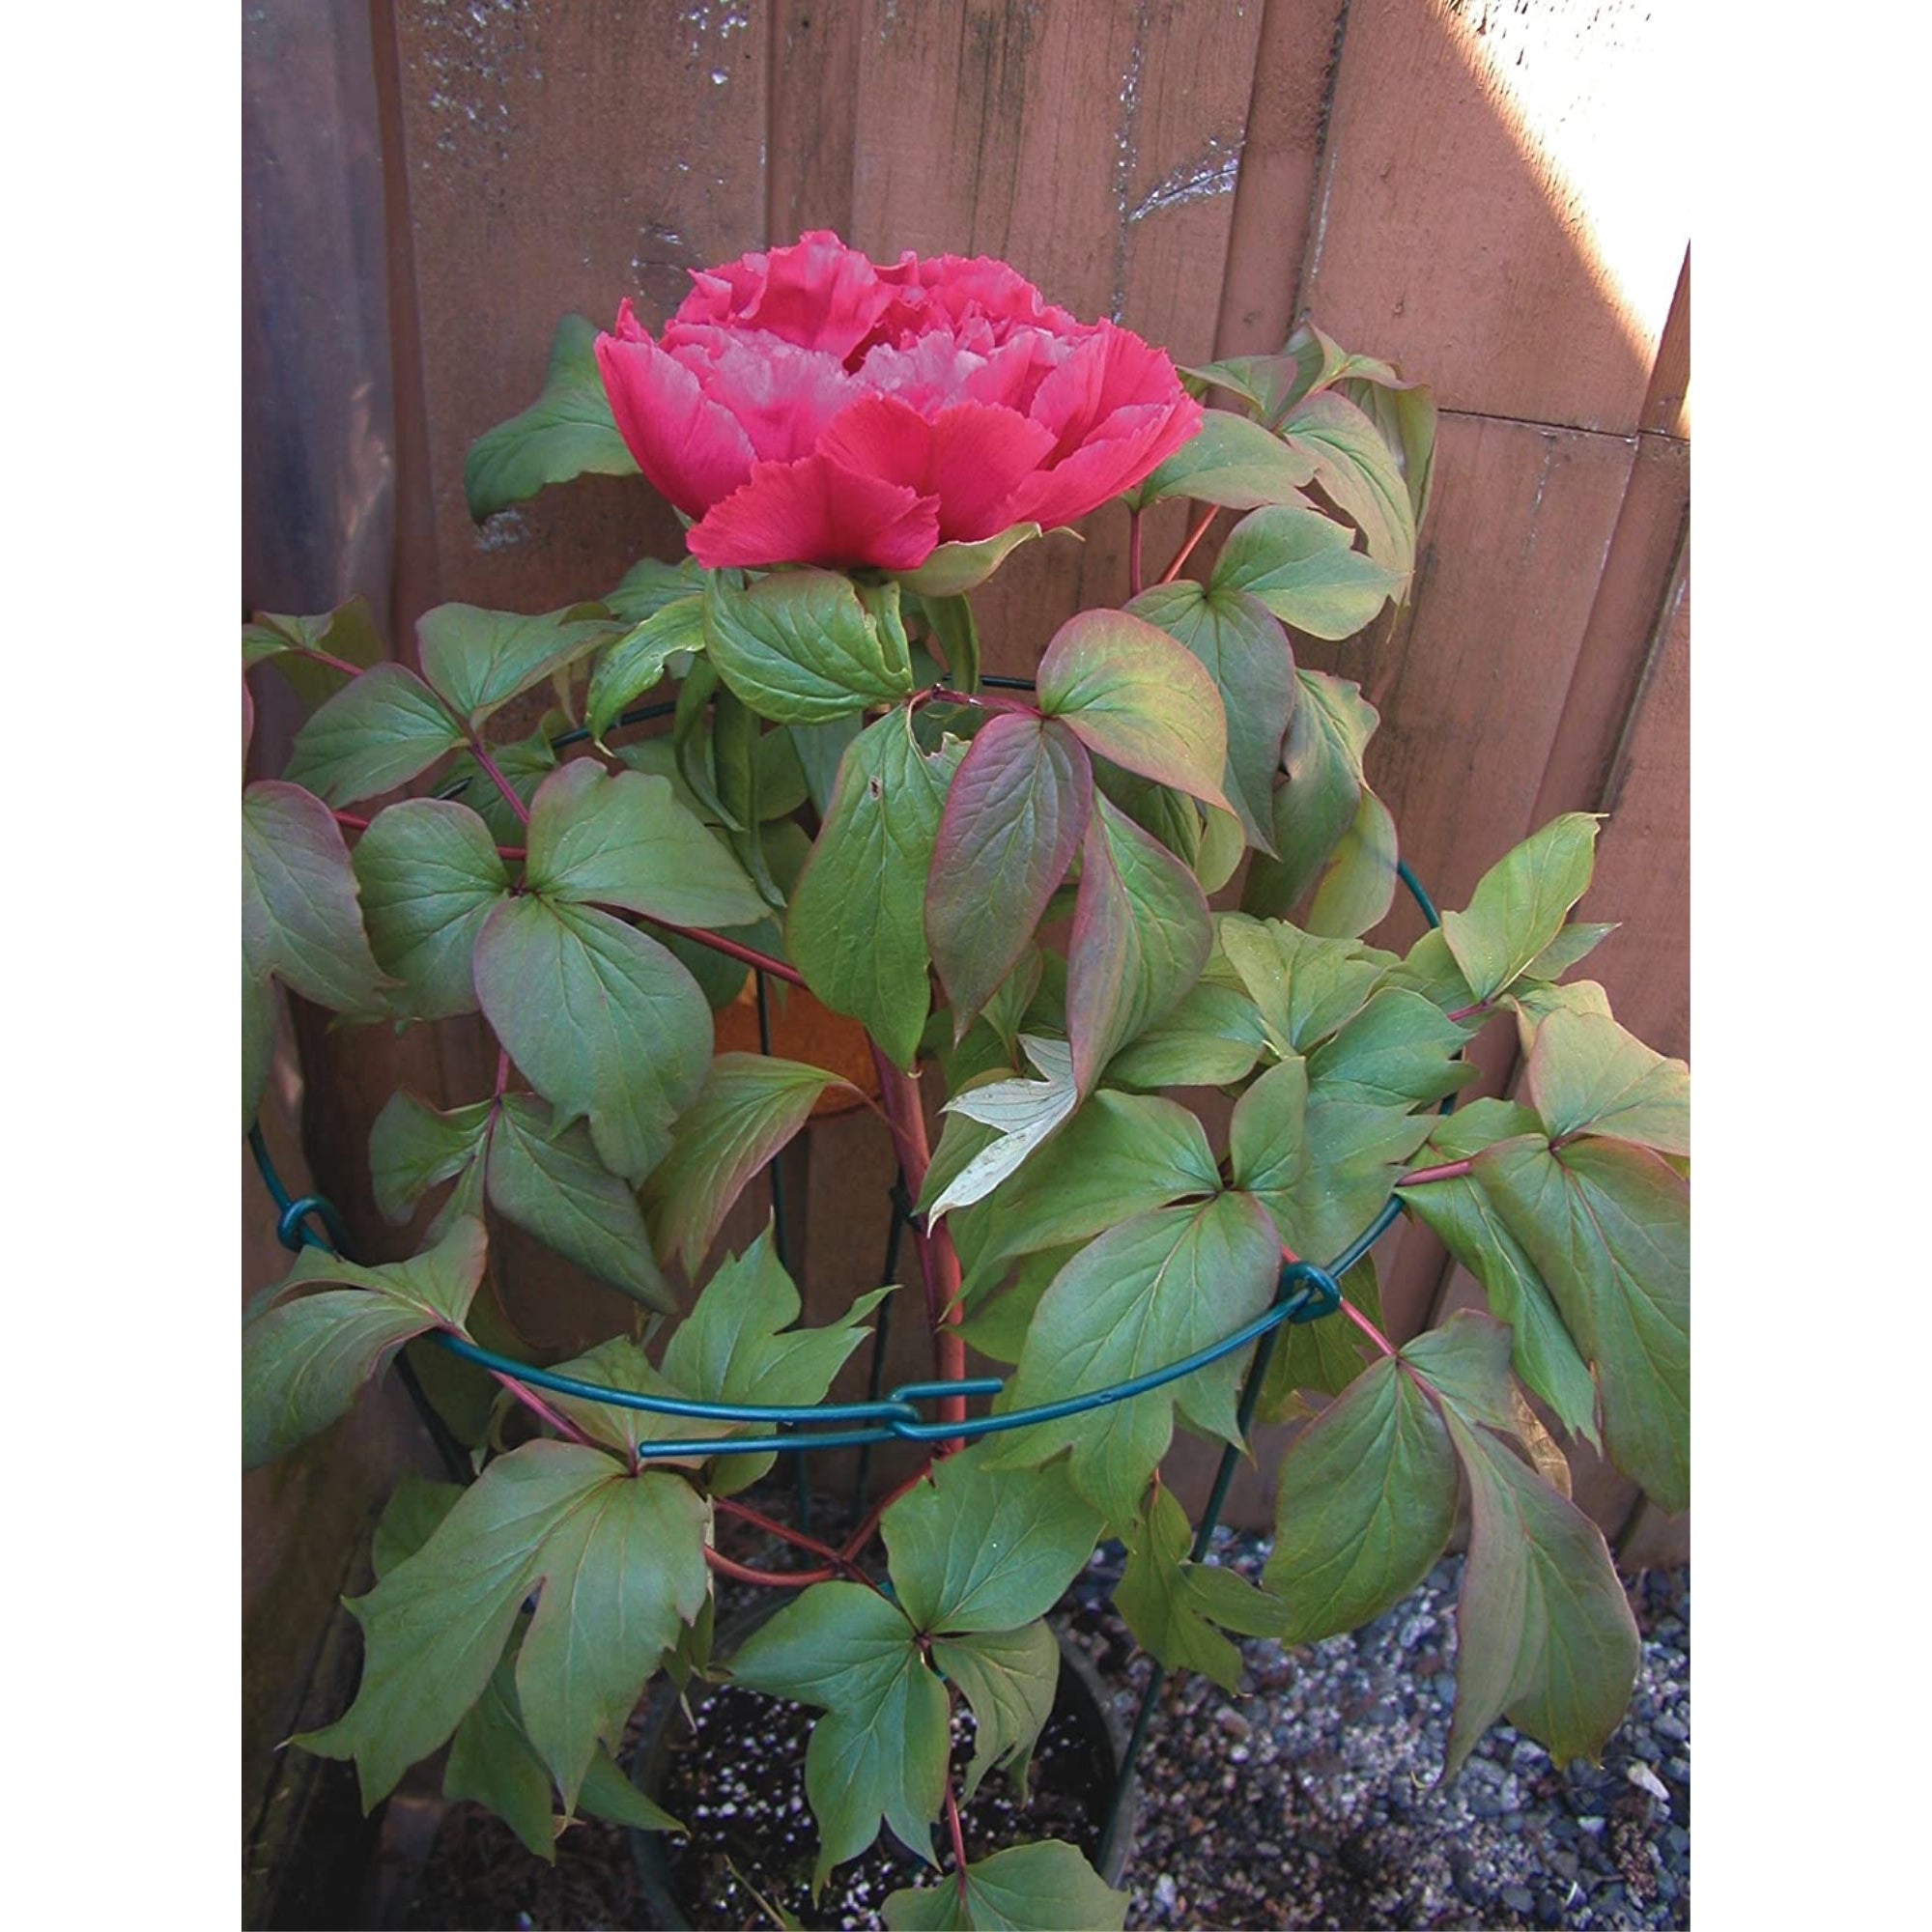 Luster Leaf Small Single Peony Flower Support, Green 10"